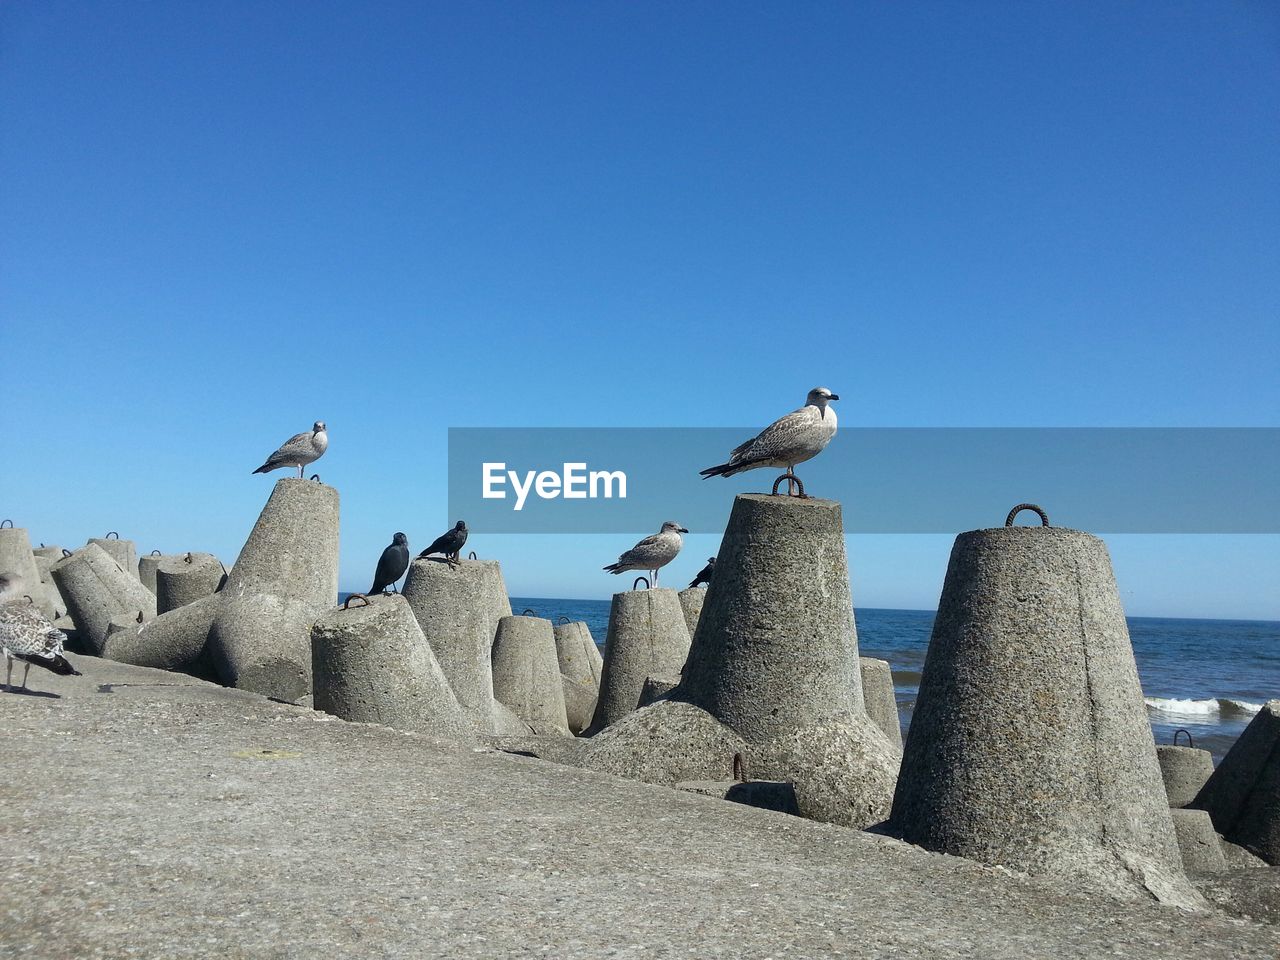 Seagulls perching against clear blue sky